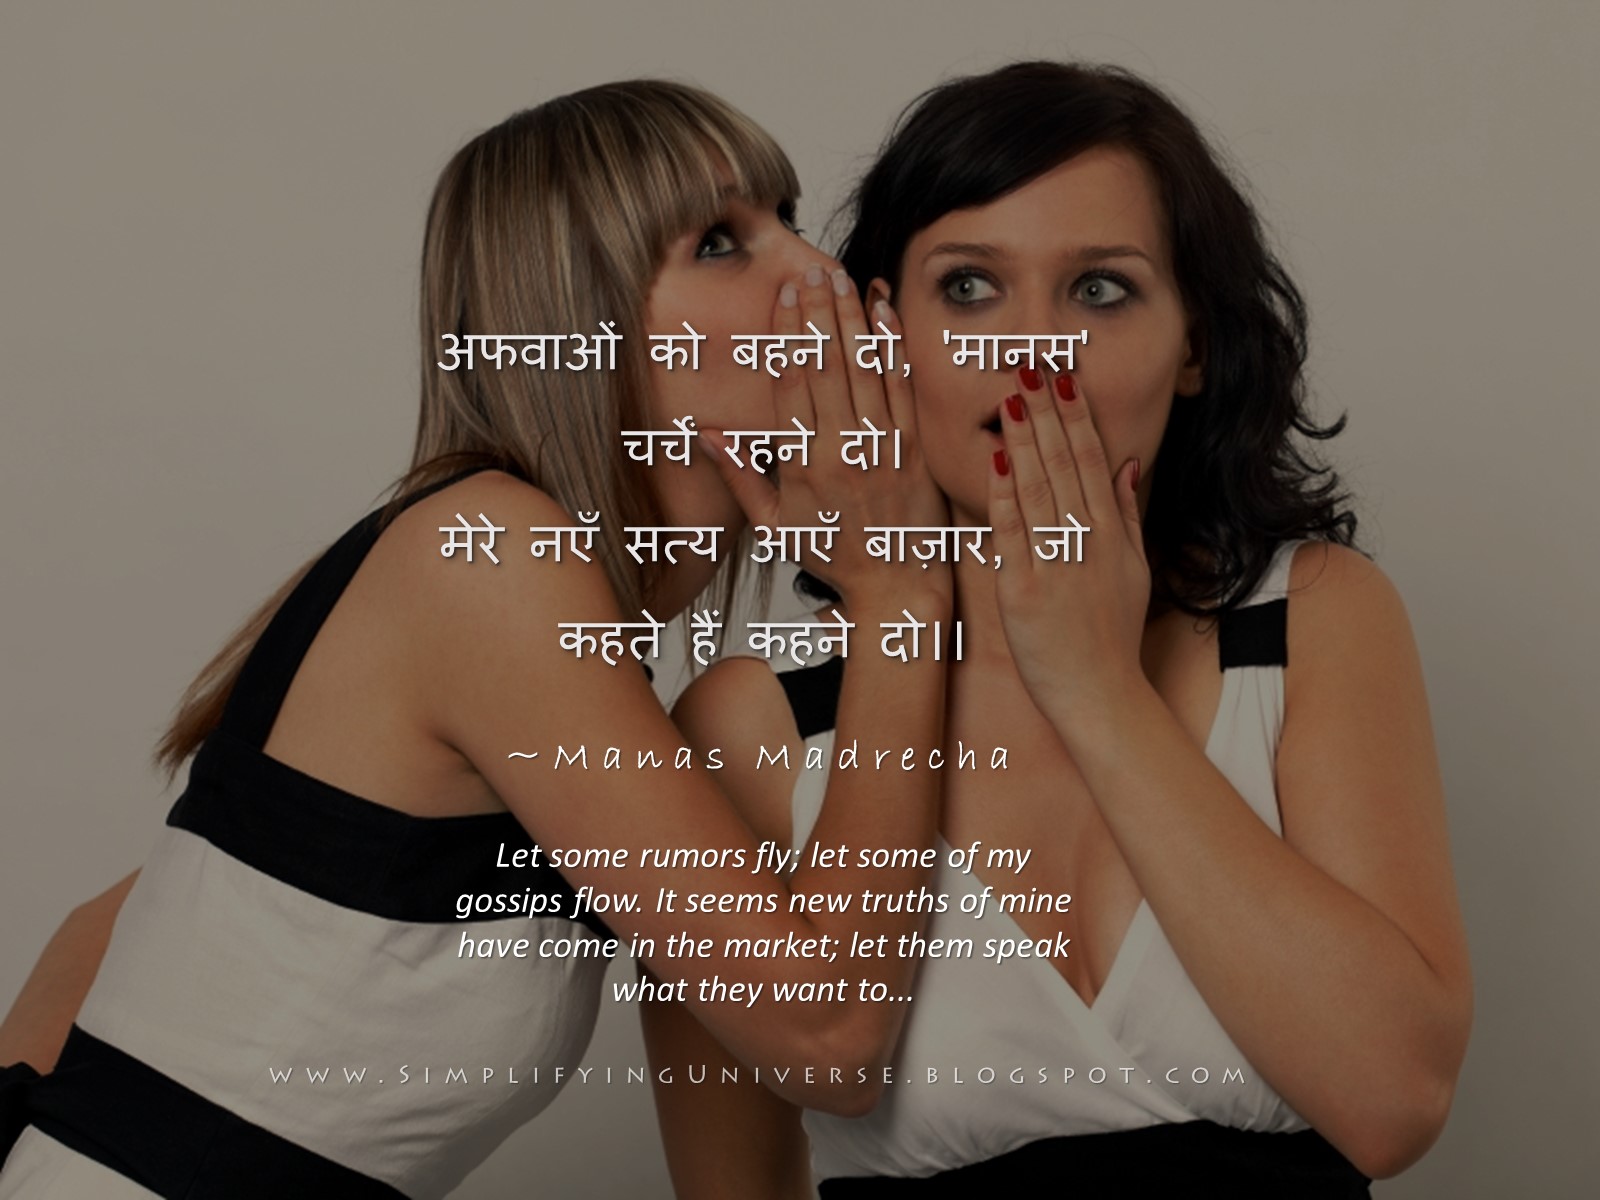 woman gossip, rumors, women talking to each other in ear, blonde and brunette women, hindi poem on criticism, manas madrecha, hindi quotes on criticism rumors, beautiful attractive women, simplifying universe, india mumbai blog, self help hindi poet